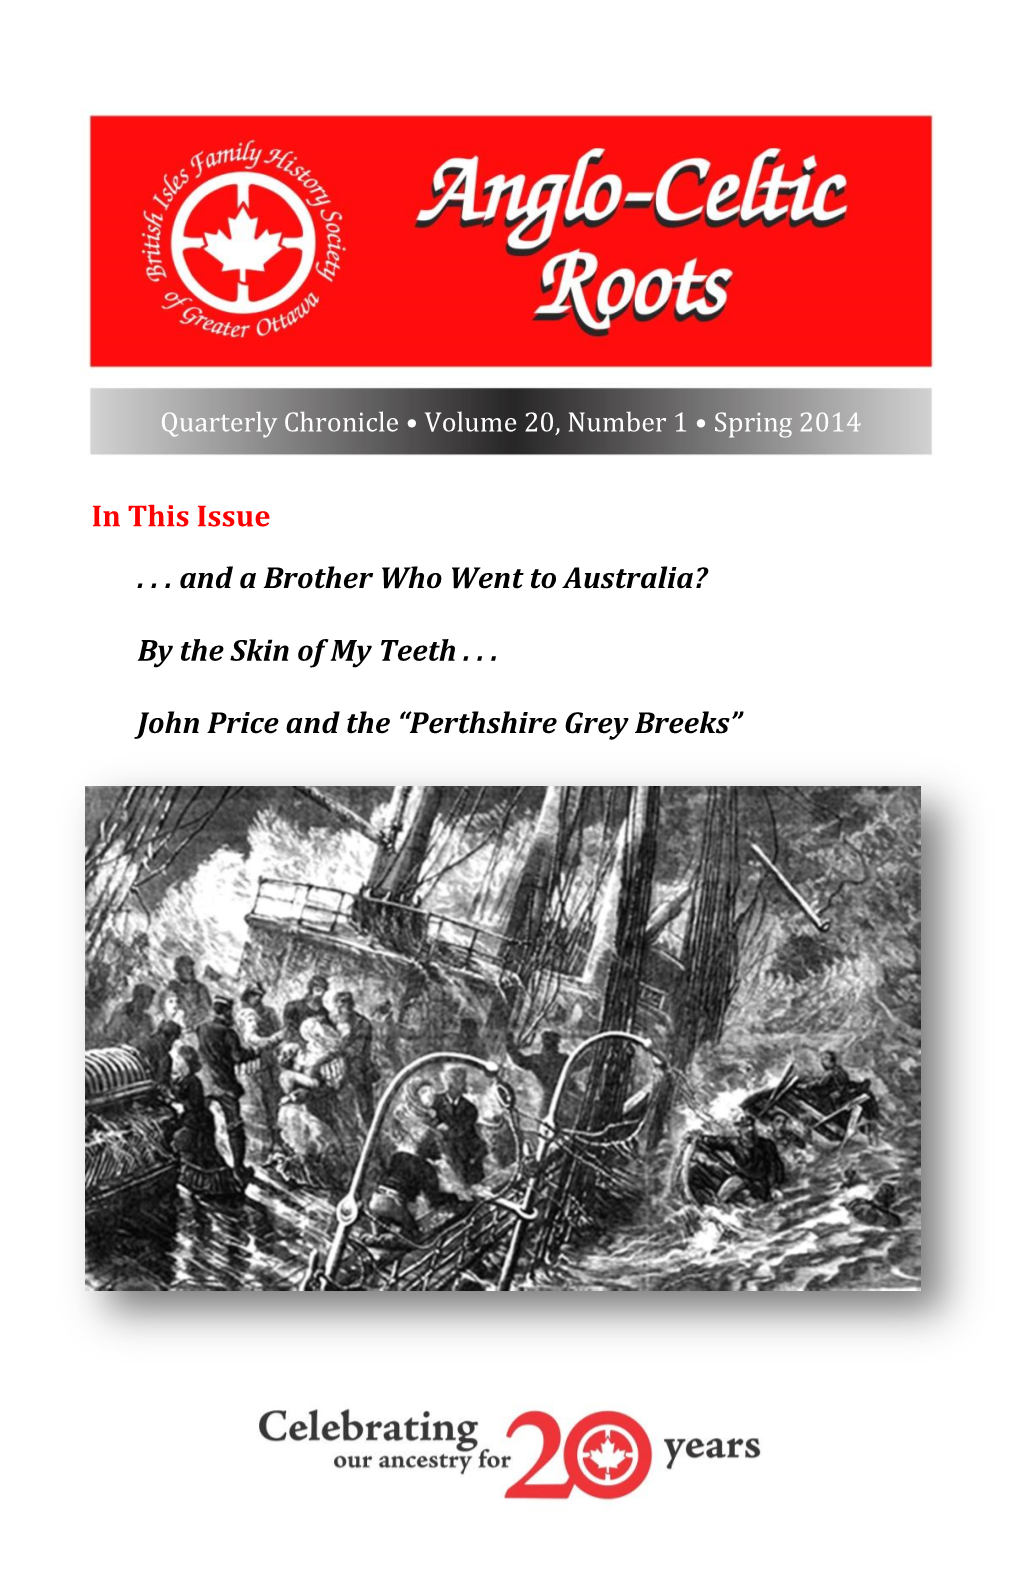 In This Issue . . . and a Brother Who Went to Australia? by the Skin of My Teeth . . . John Price and the “Perthshire Grey